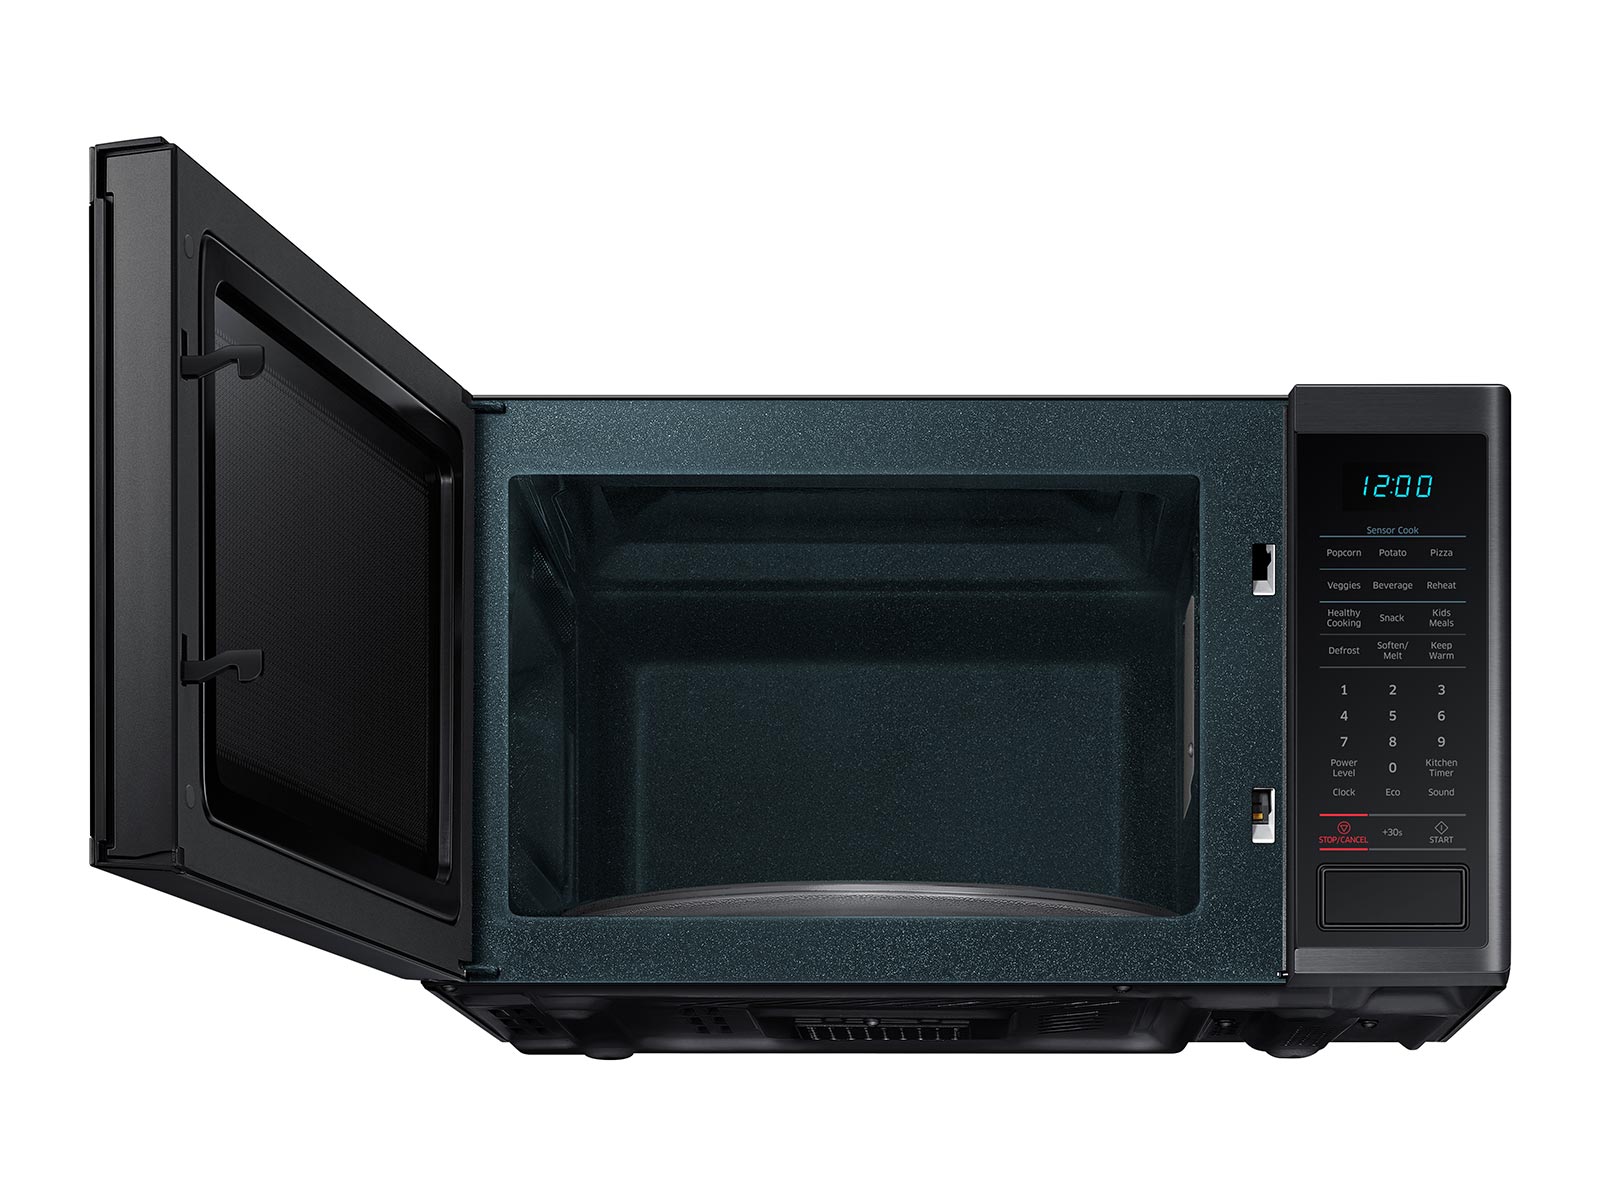 Thumbnail image of 1.4 cu. ft. Countertop Microwave with Sensor Cooking in Fingerprint Resistant Black Stainless Steel